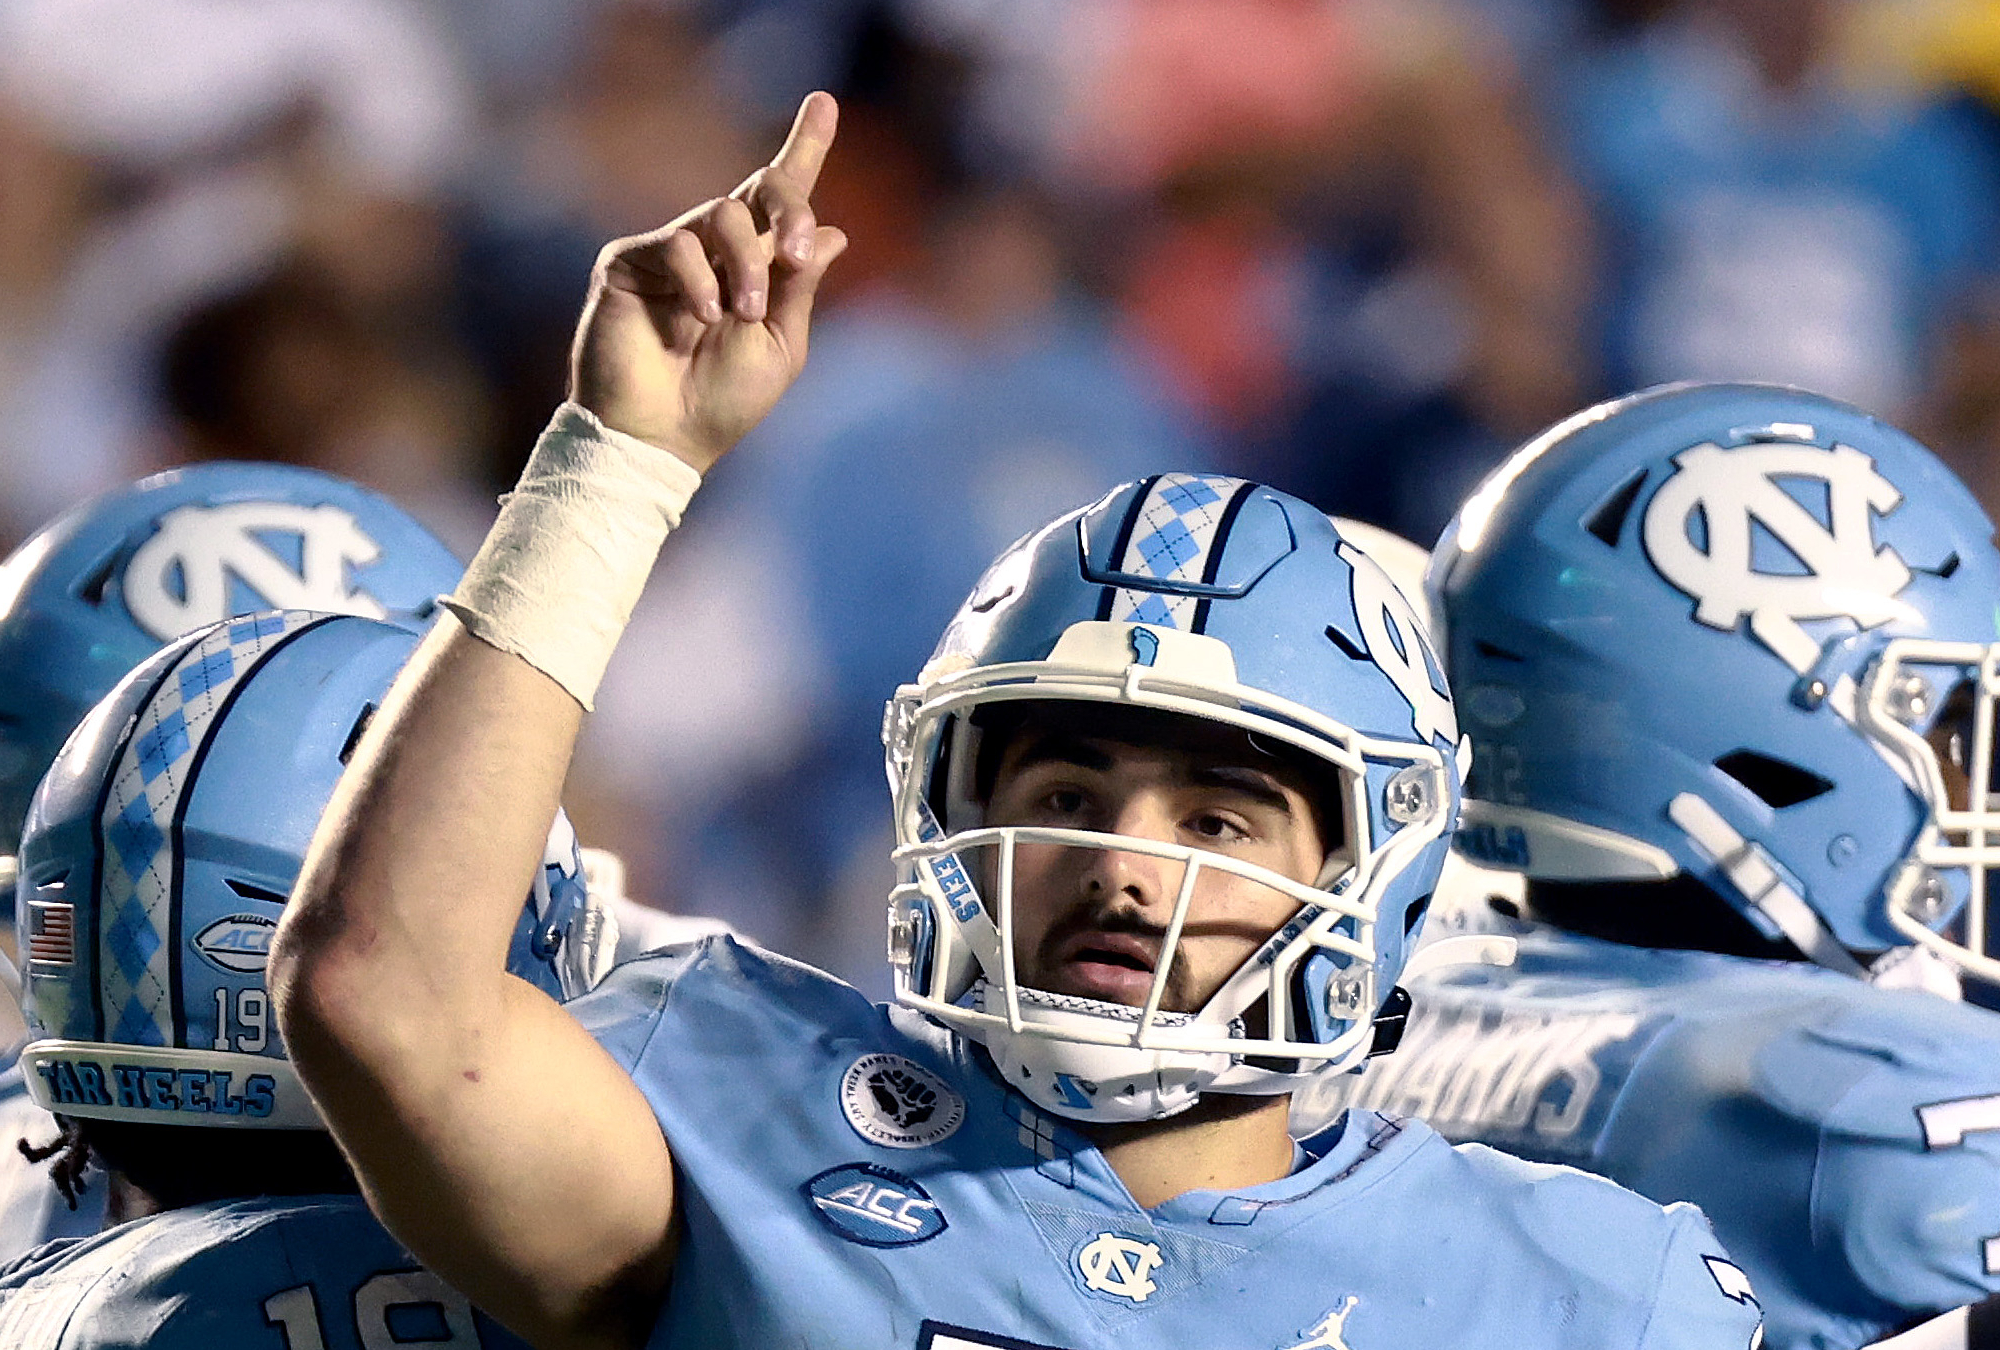 Where will North Carolina quarterback Sam Howell be selected in the 2022 NFL Draft?